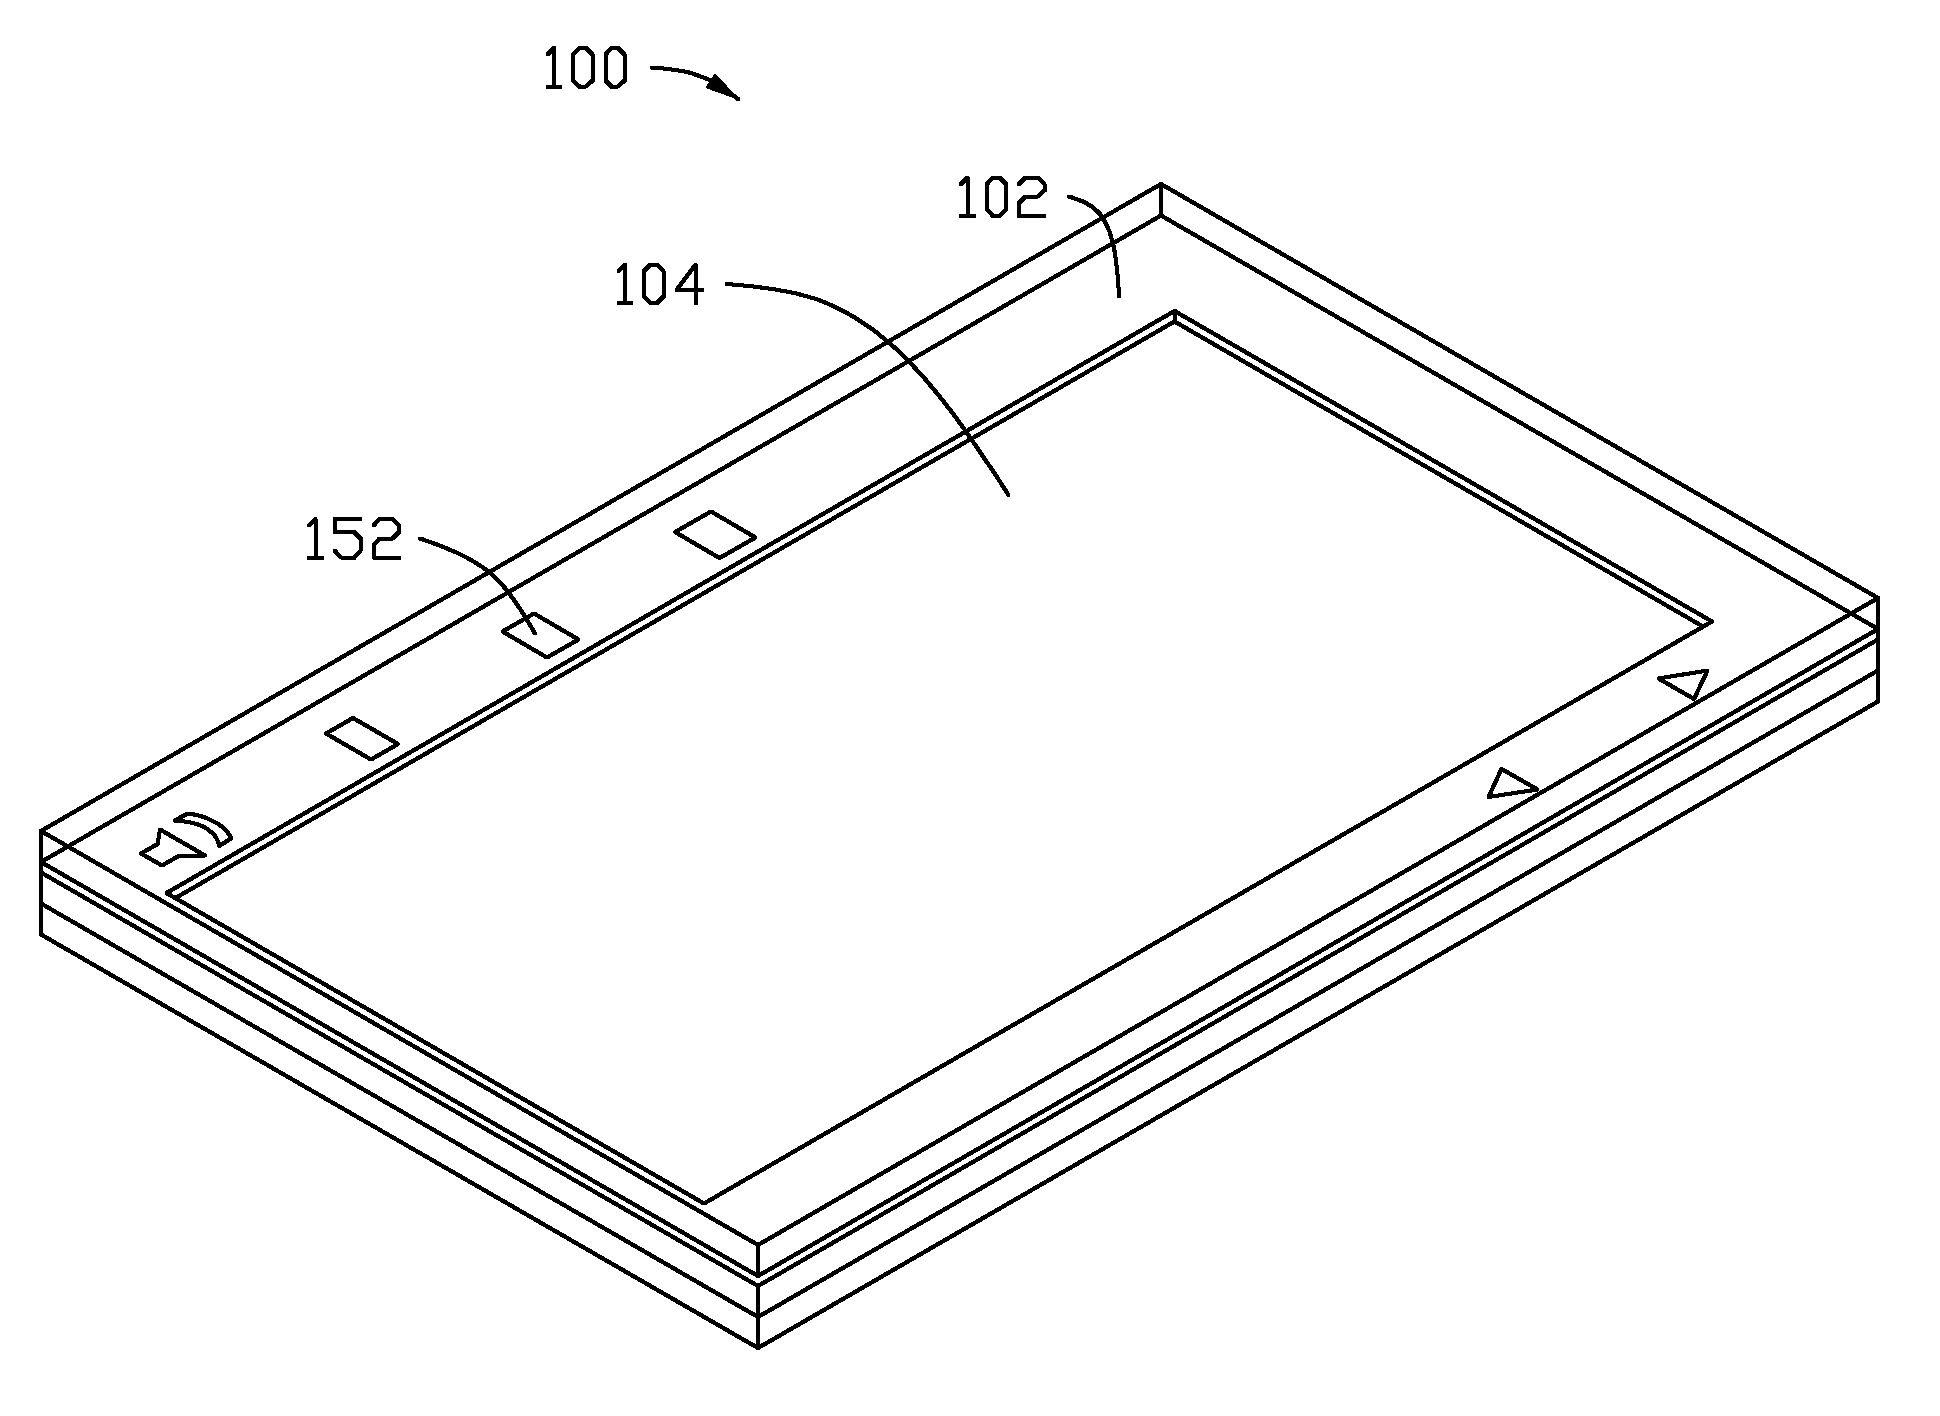 Conductive structure and method of manufacturing the same